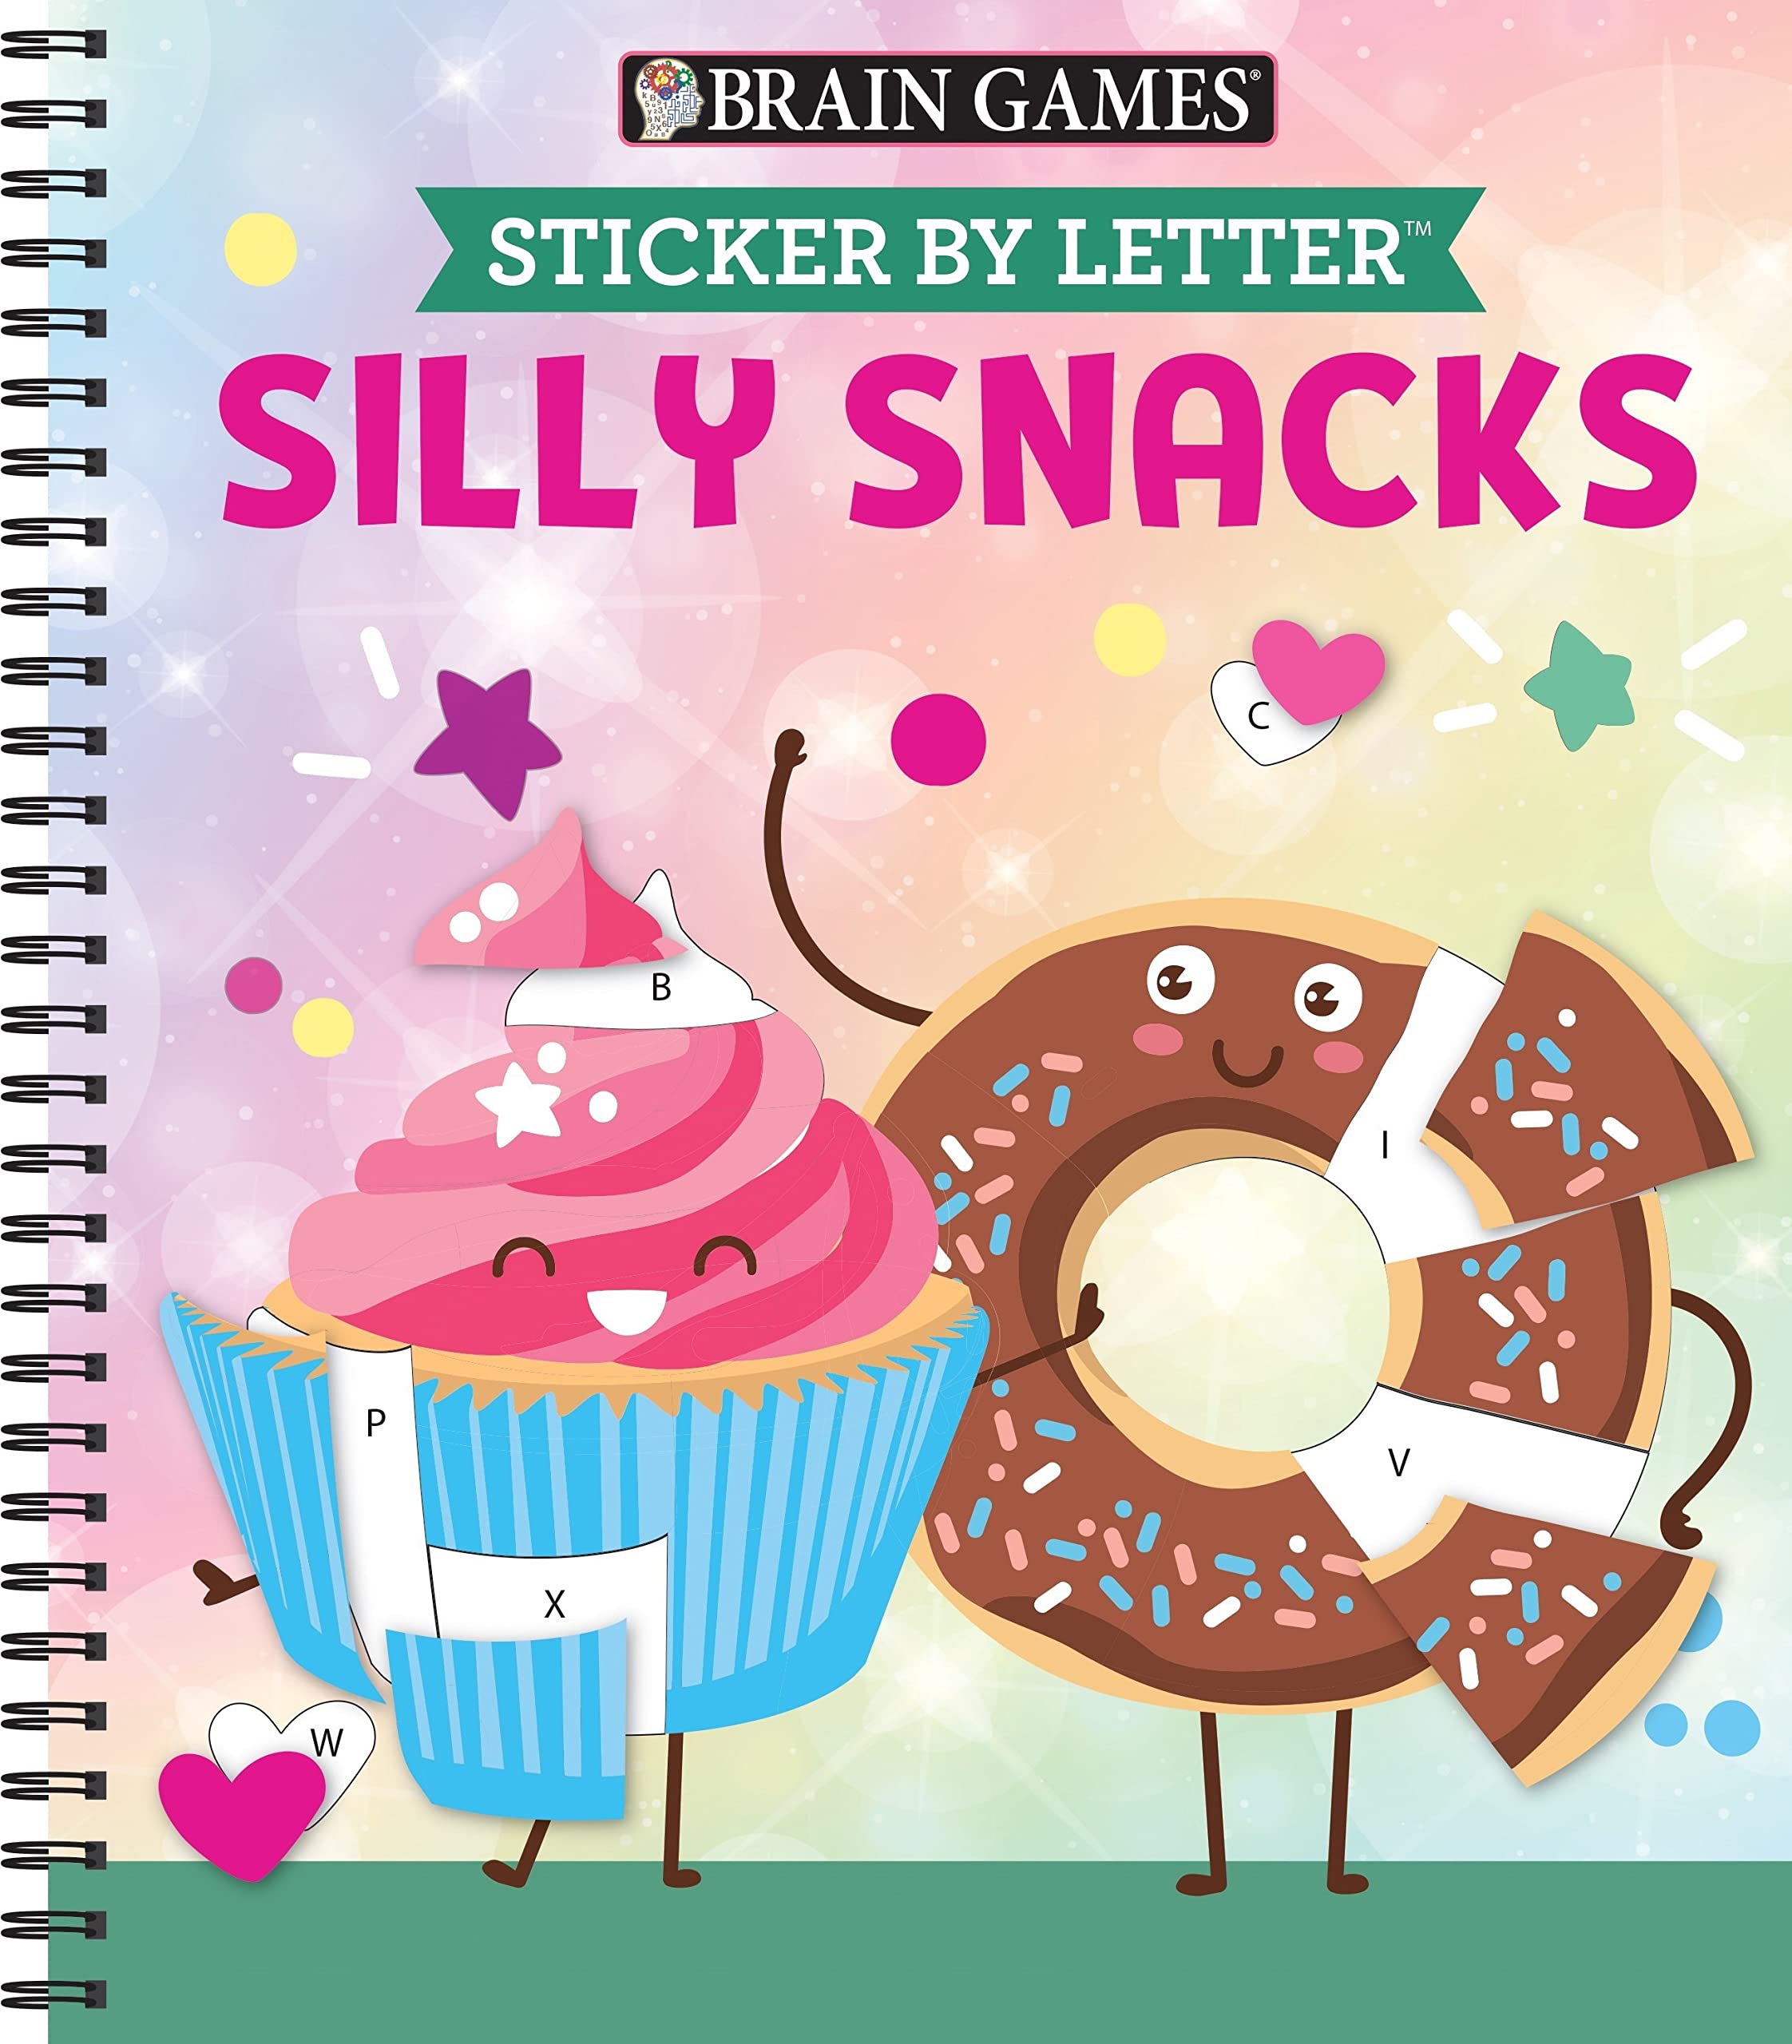 Brain Games - Sticker by Letter: Silly Snacks